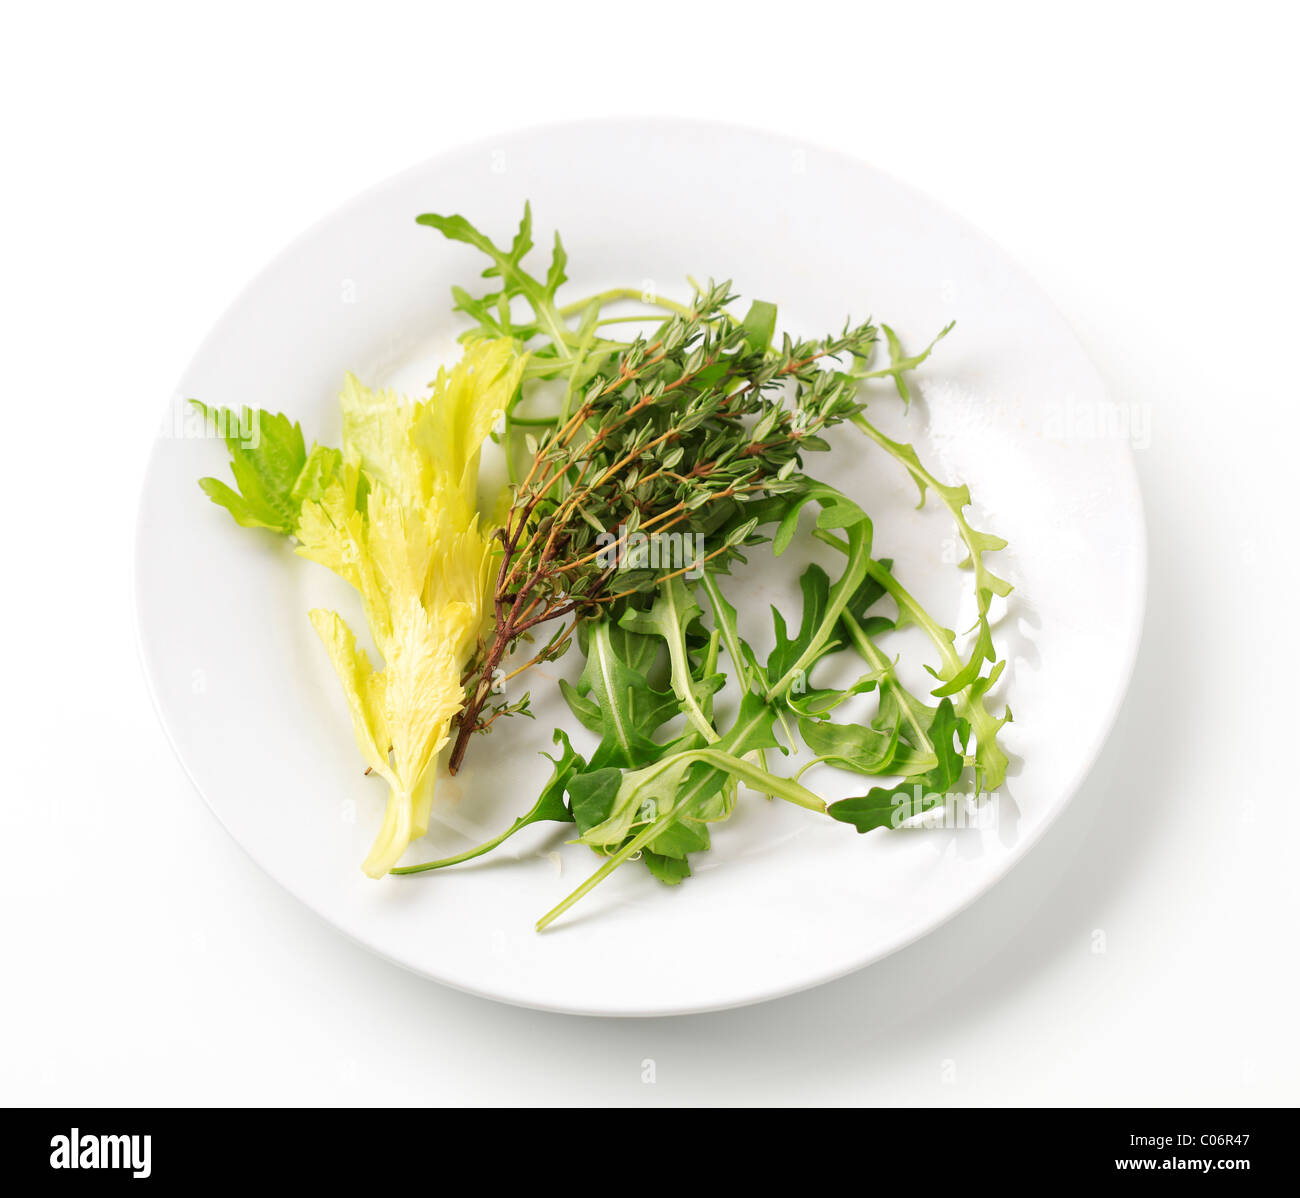 Sprigs of thyme and salad greens on a plate Stock Photo